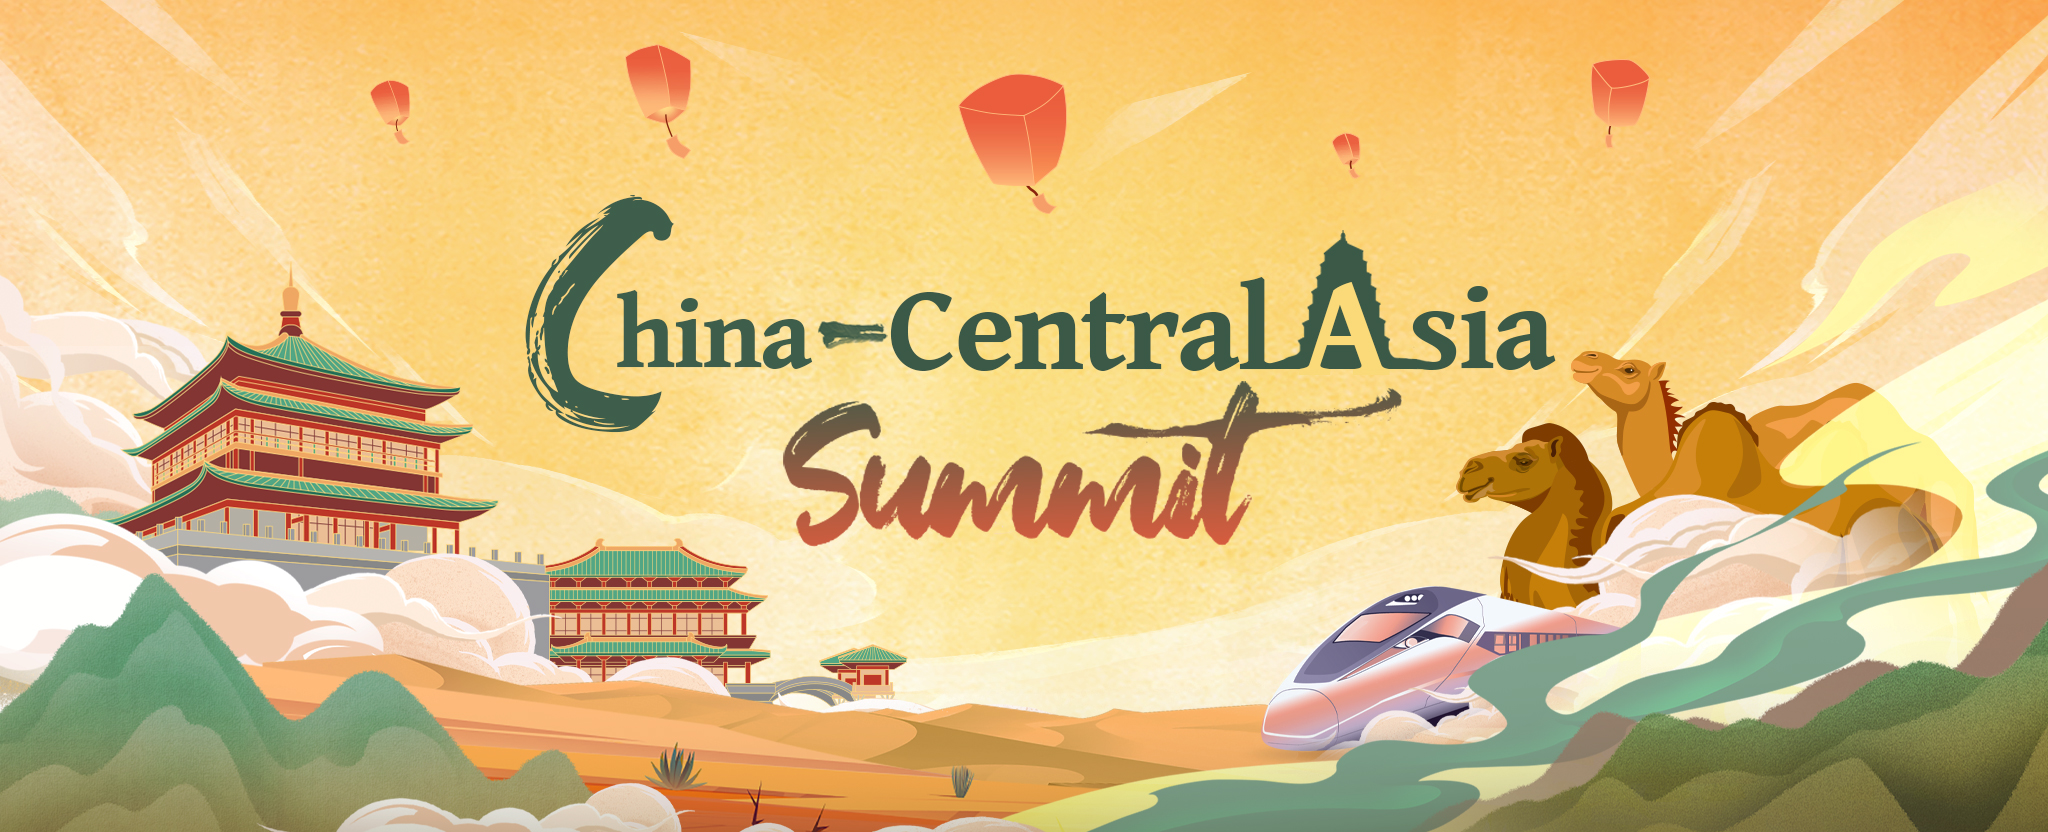 banner for the China central Asia summit